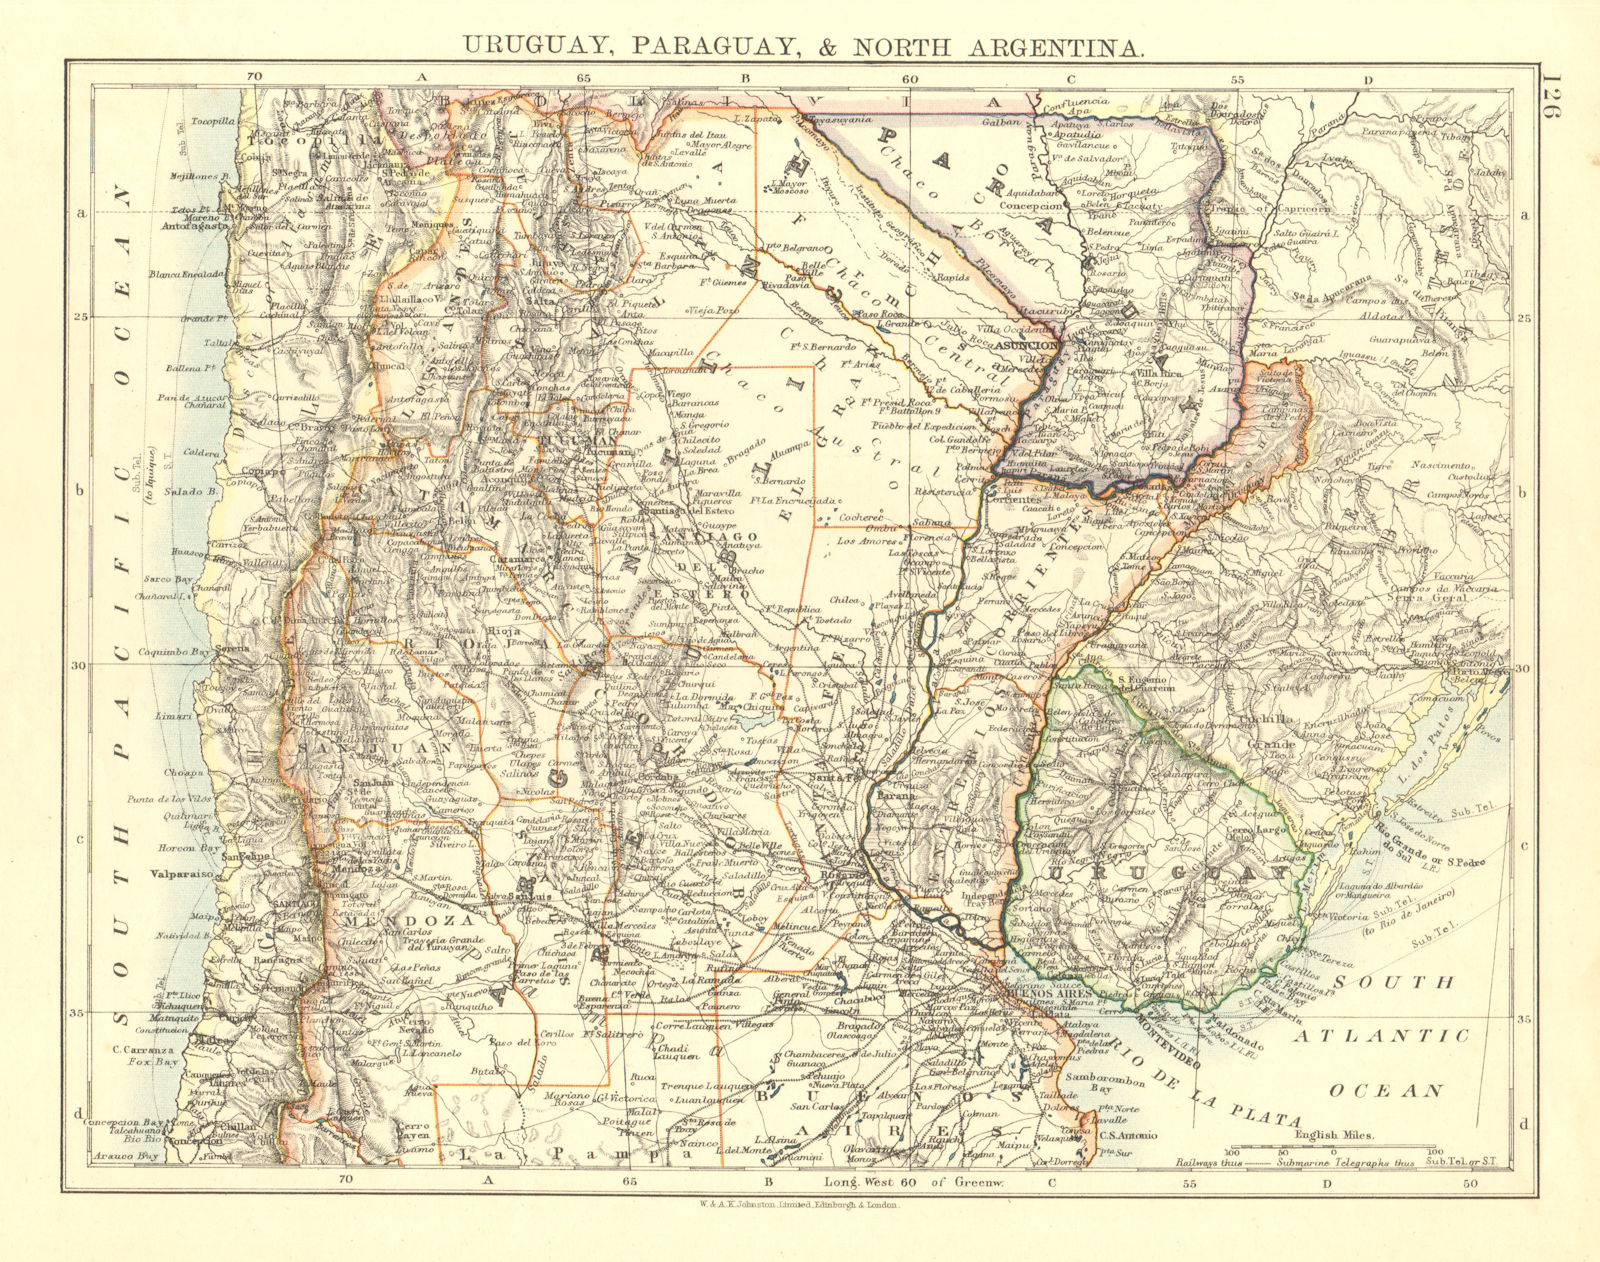 Associate Product URUGUAY PARAGUAY NORTH ARGENTINA. River Plate States Chile.  JOHNSTON 1906 map